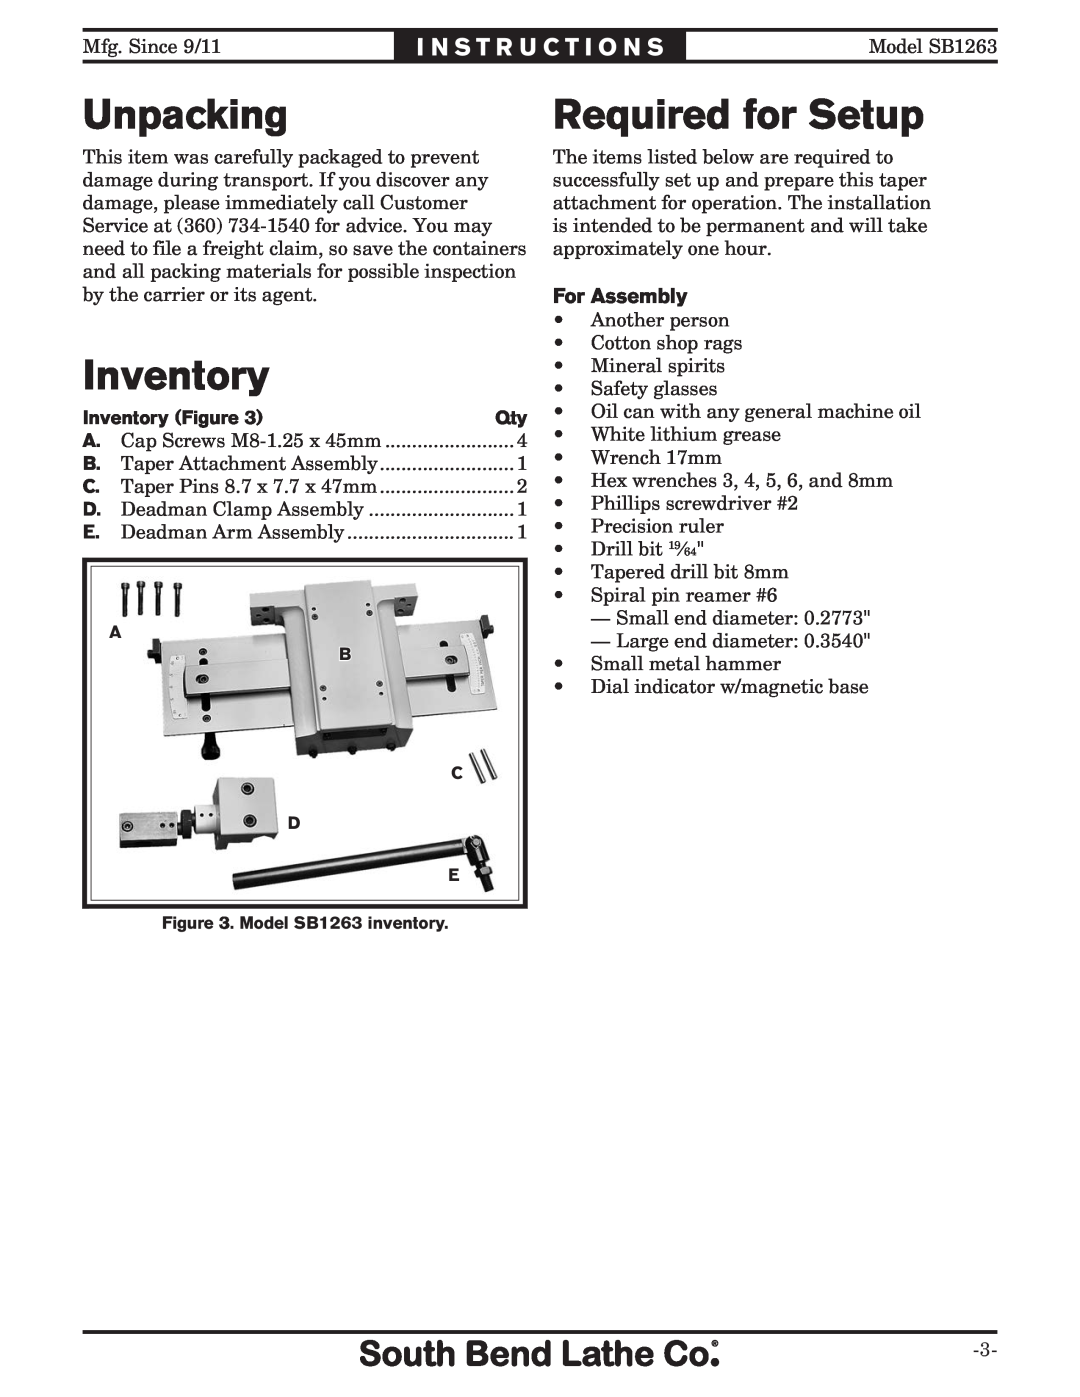 Southbend SB1263 instruction sheet Unpacking, Inventory, For Assembly, Required for Setup 